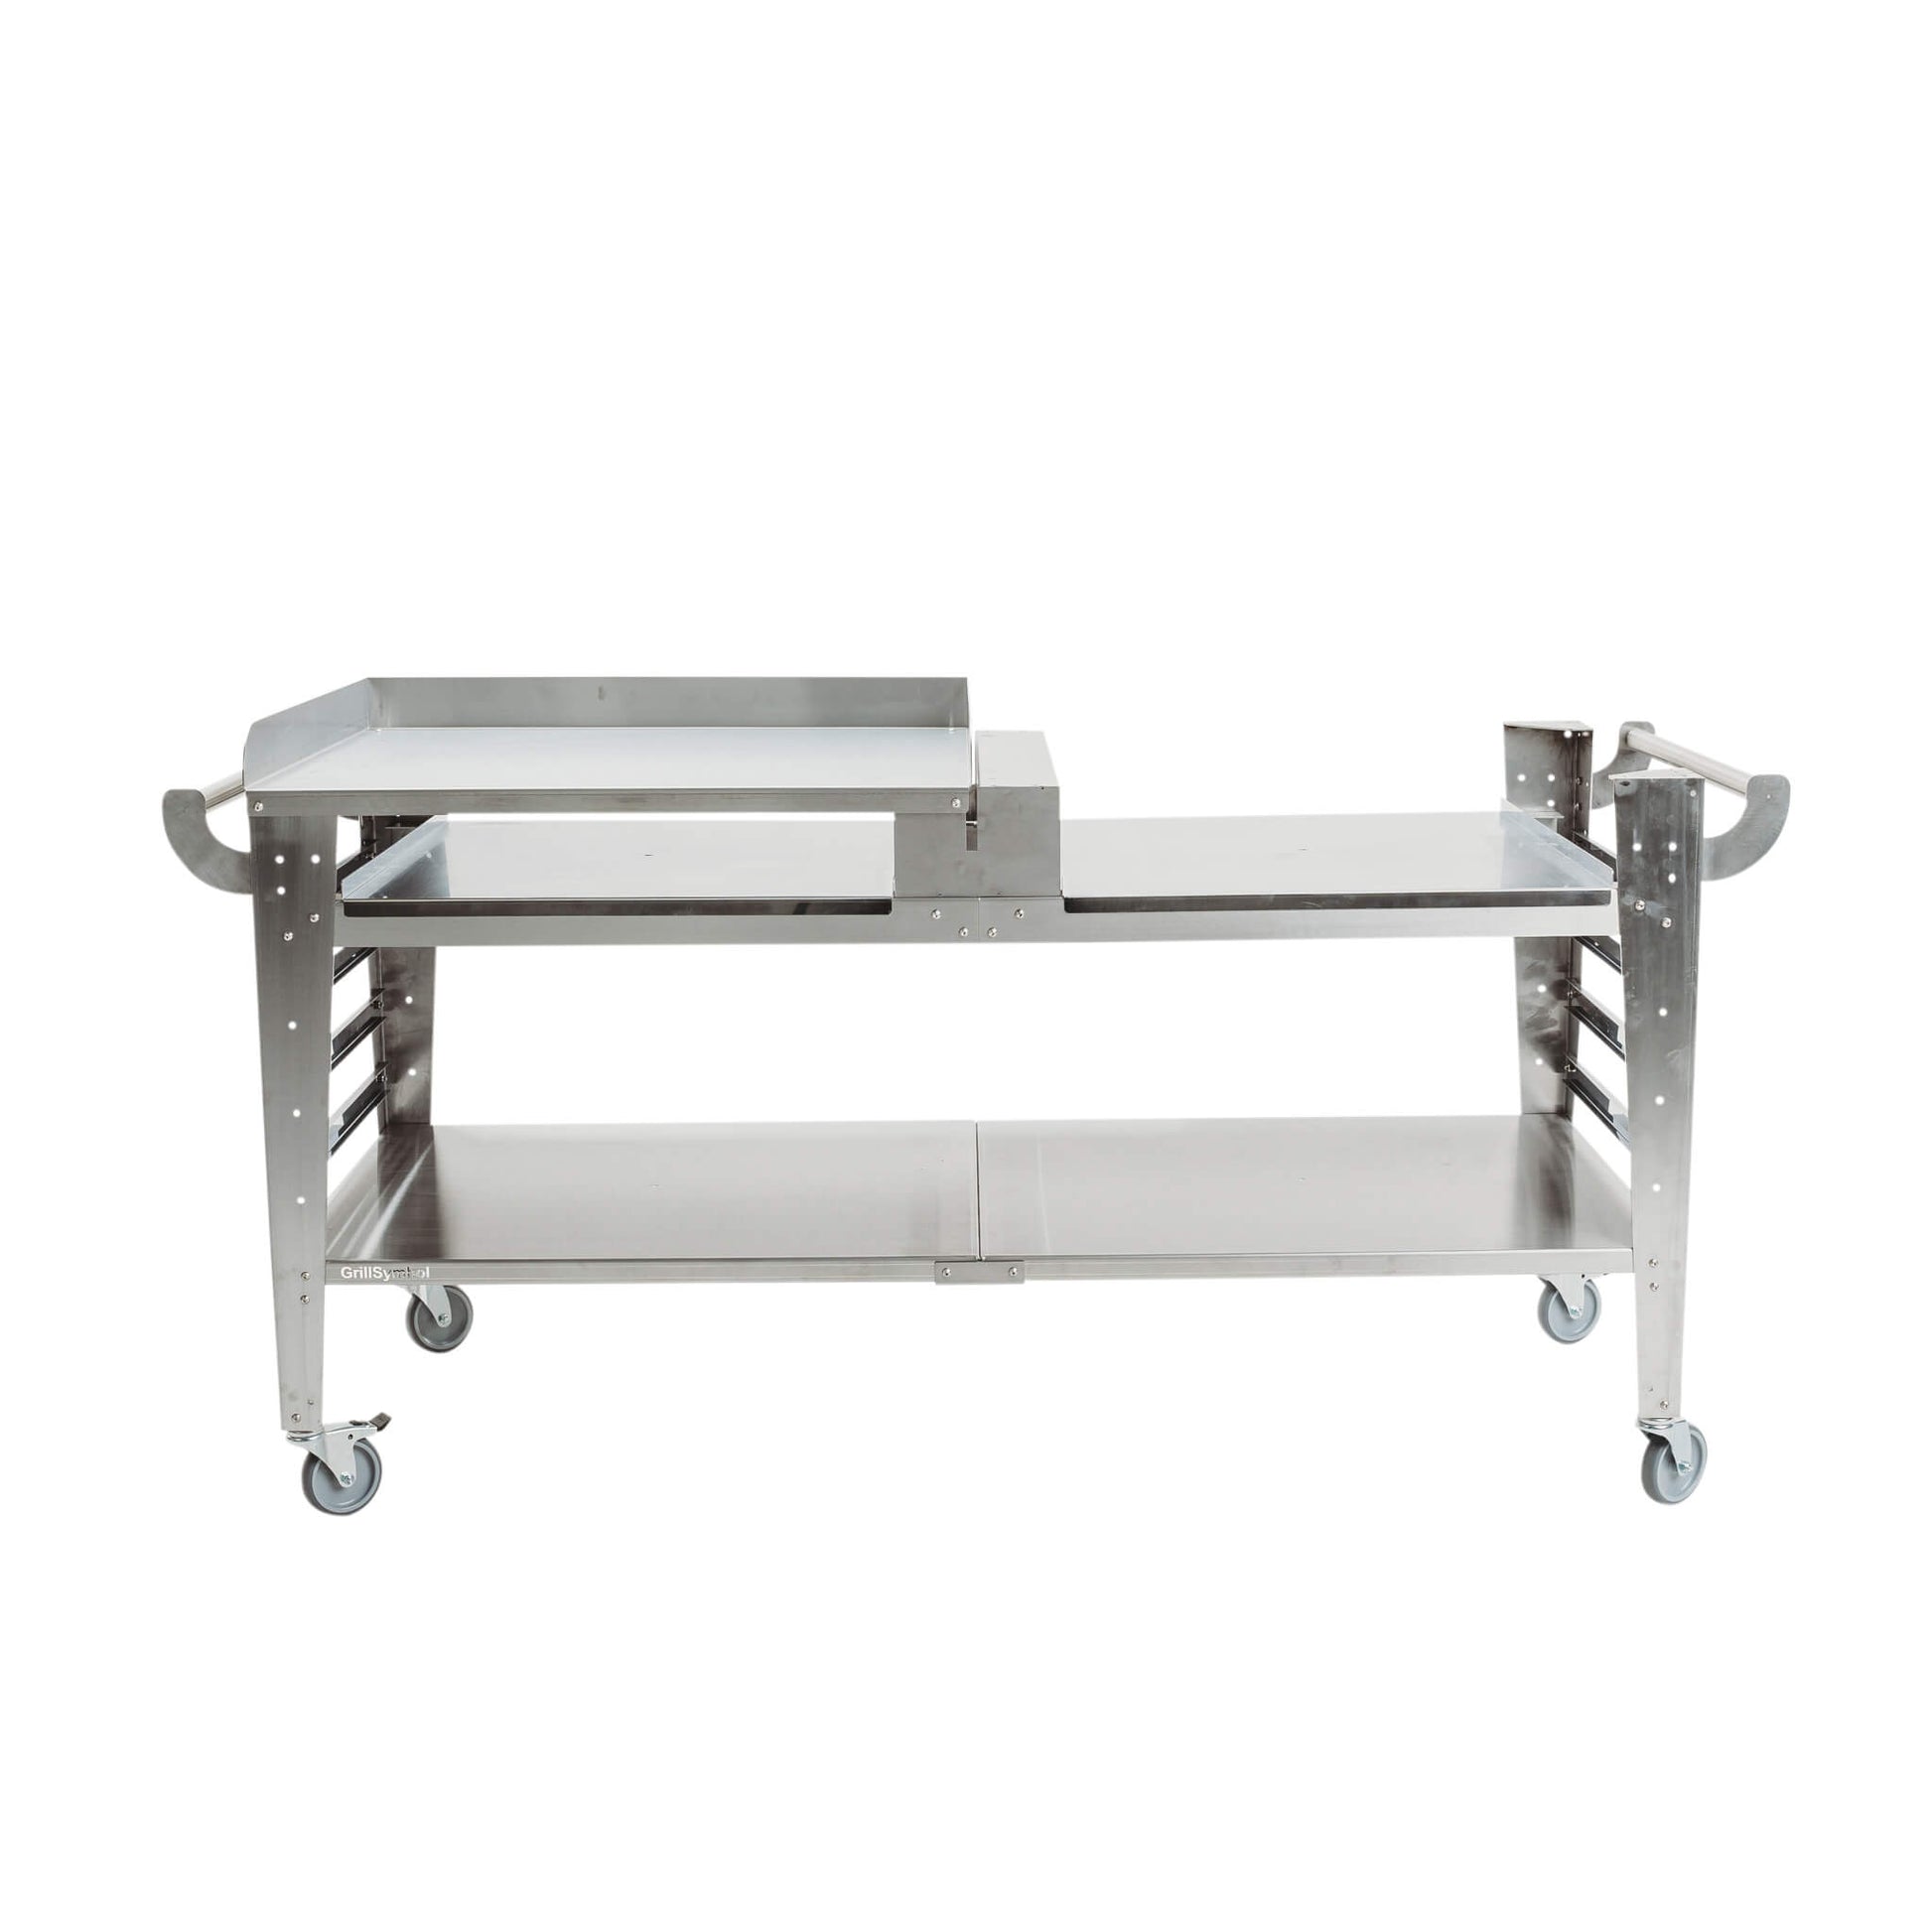 Grill Symbol - stainless steel Side Table for Pizza Oven Baso-inox-XL - Timeout Gardens